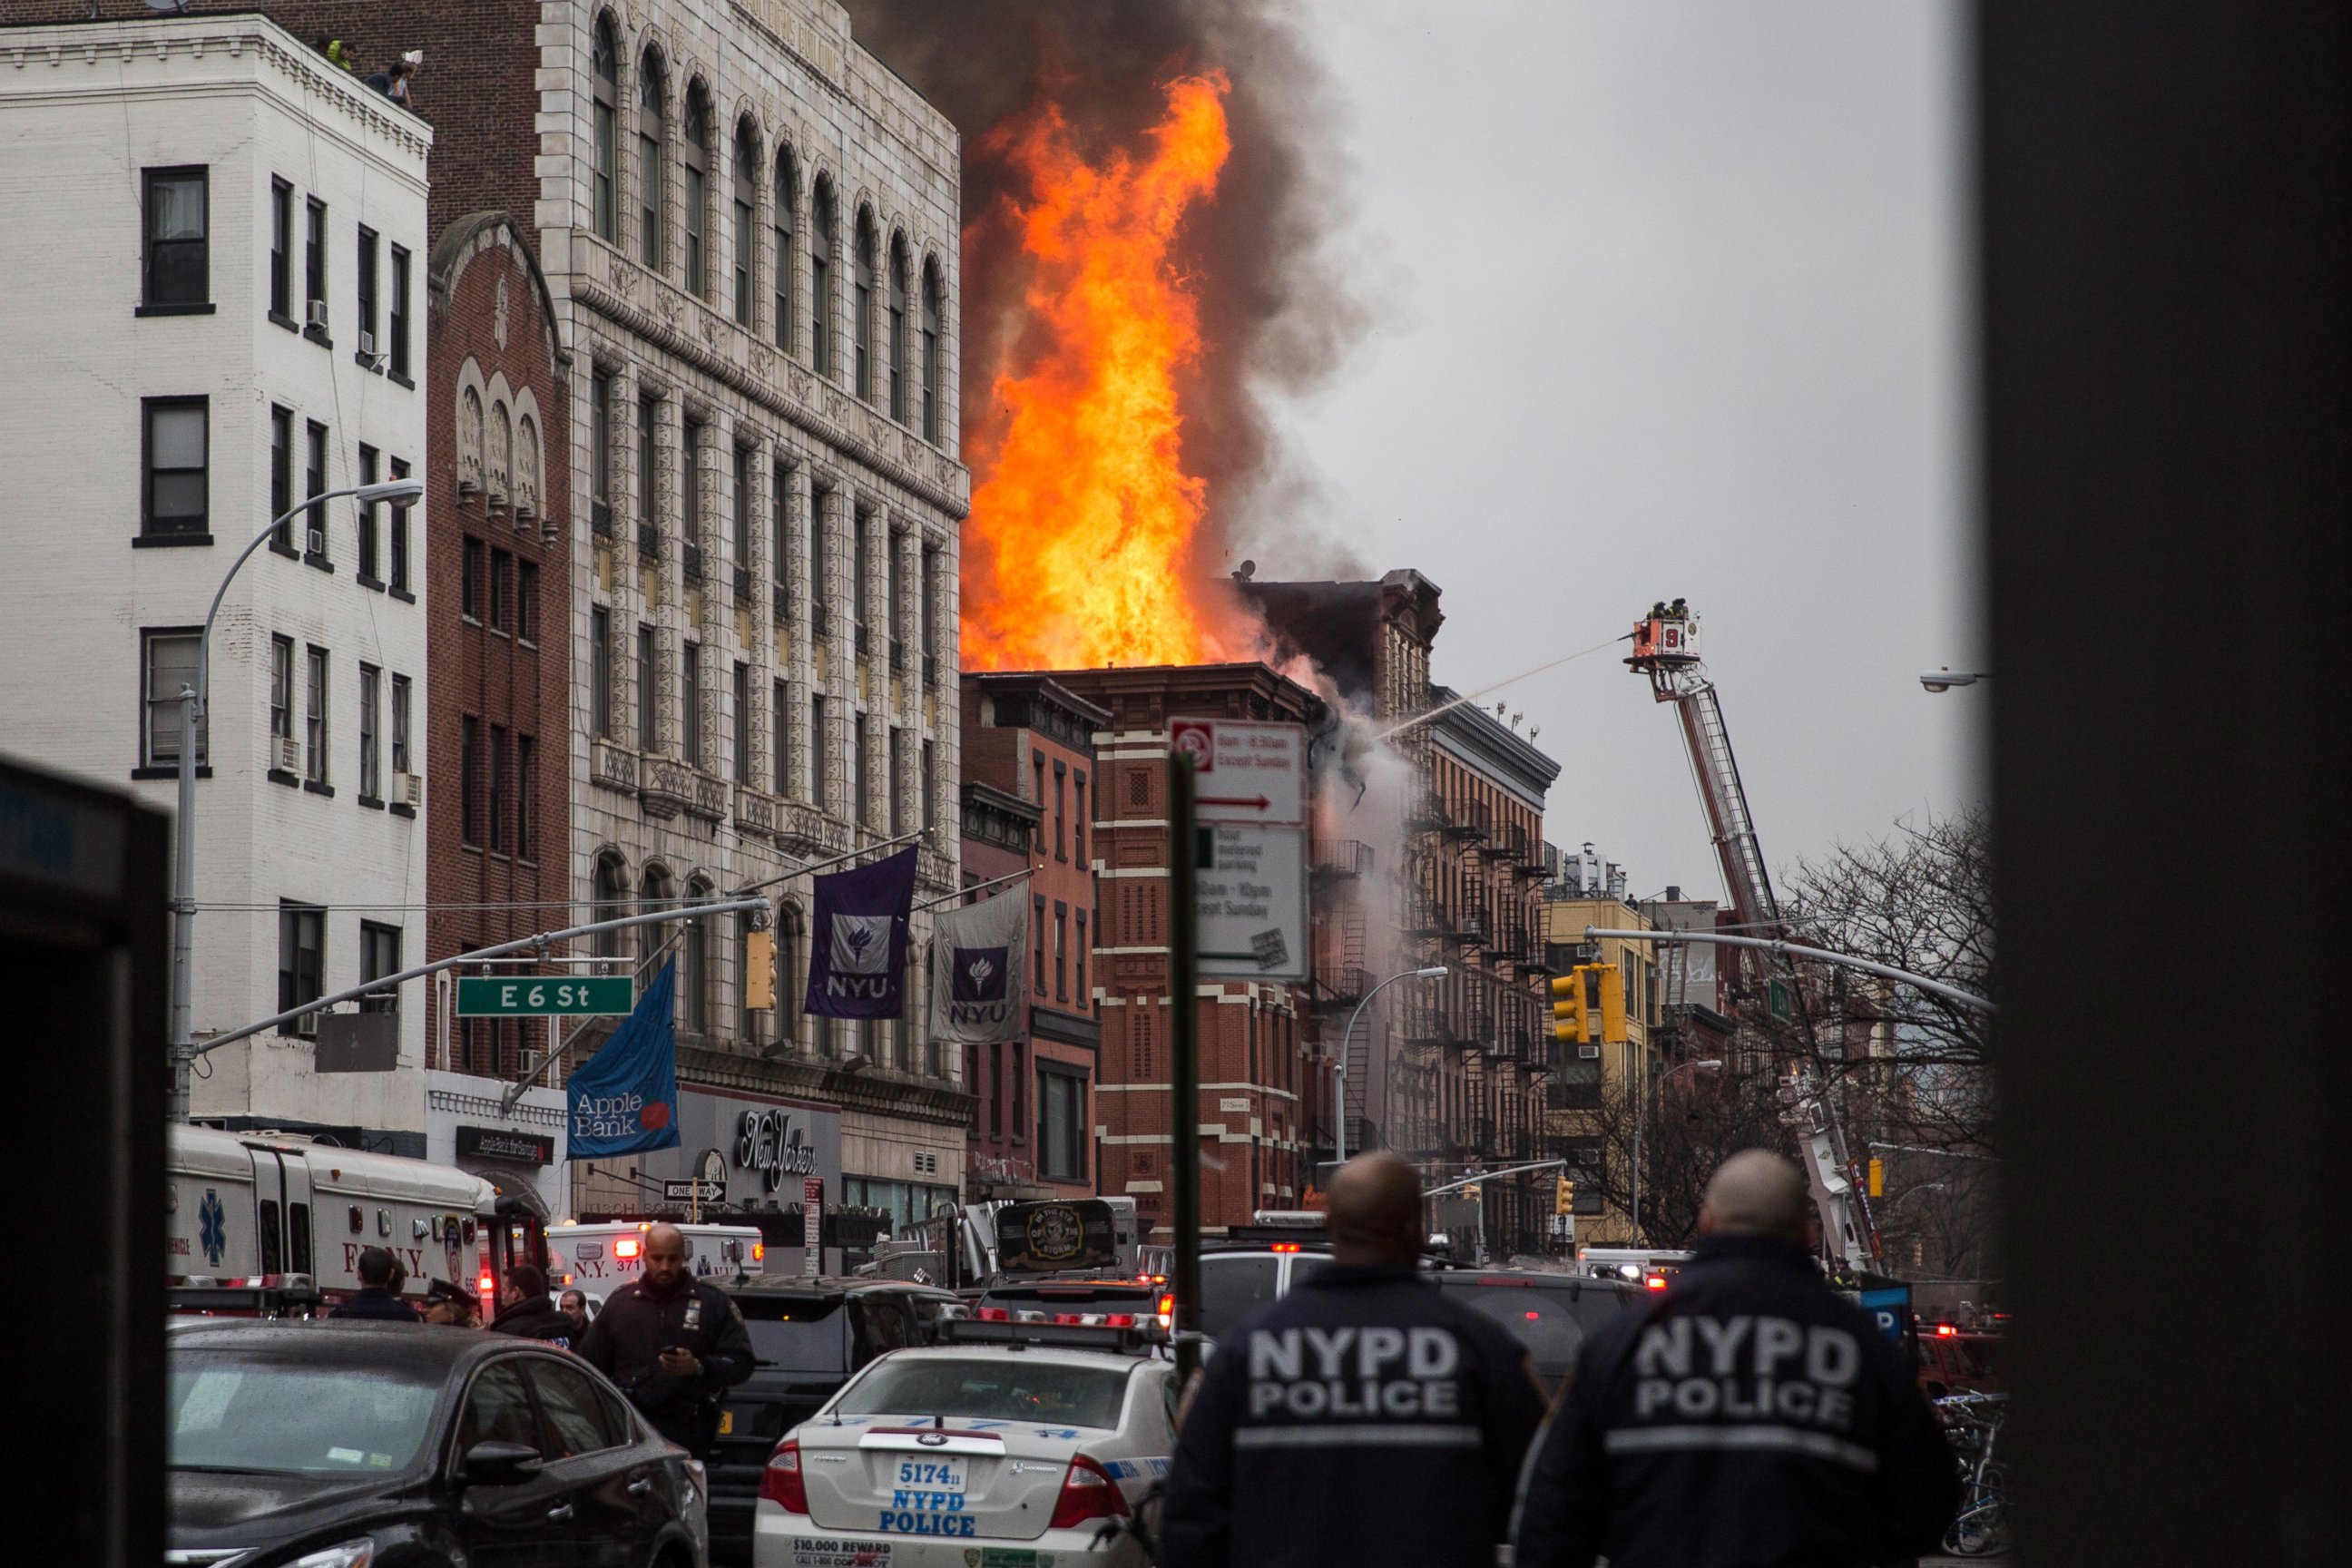 PHOTO: A building burns after an explosion on 2nd Avenue on March 26, 2015 in New York City.  